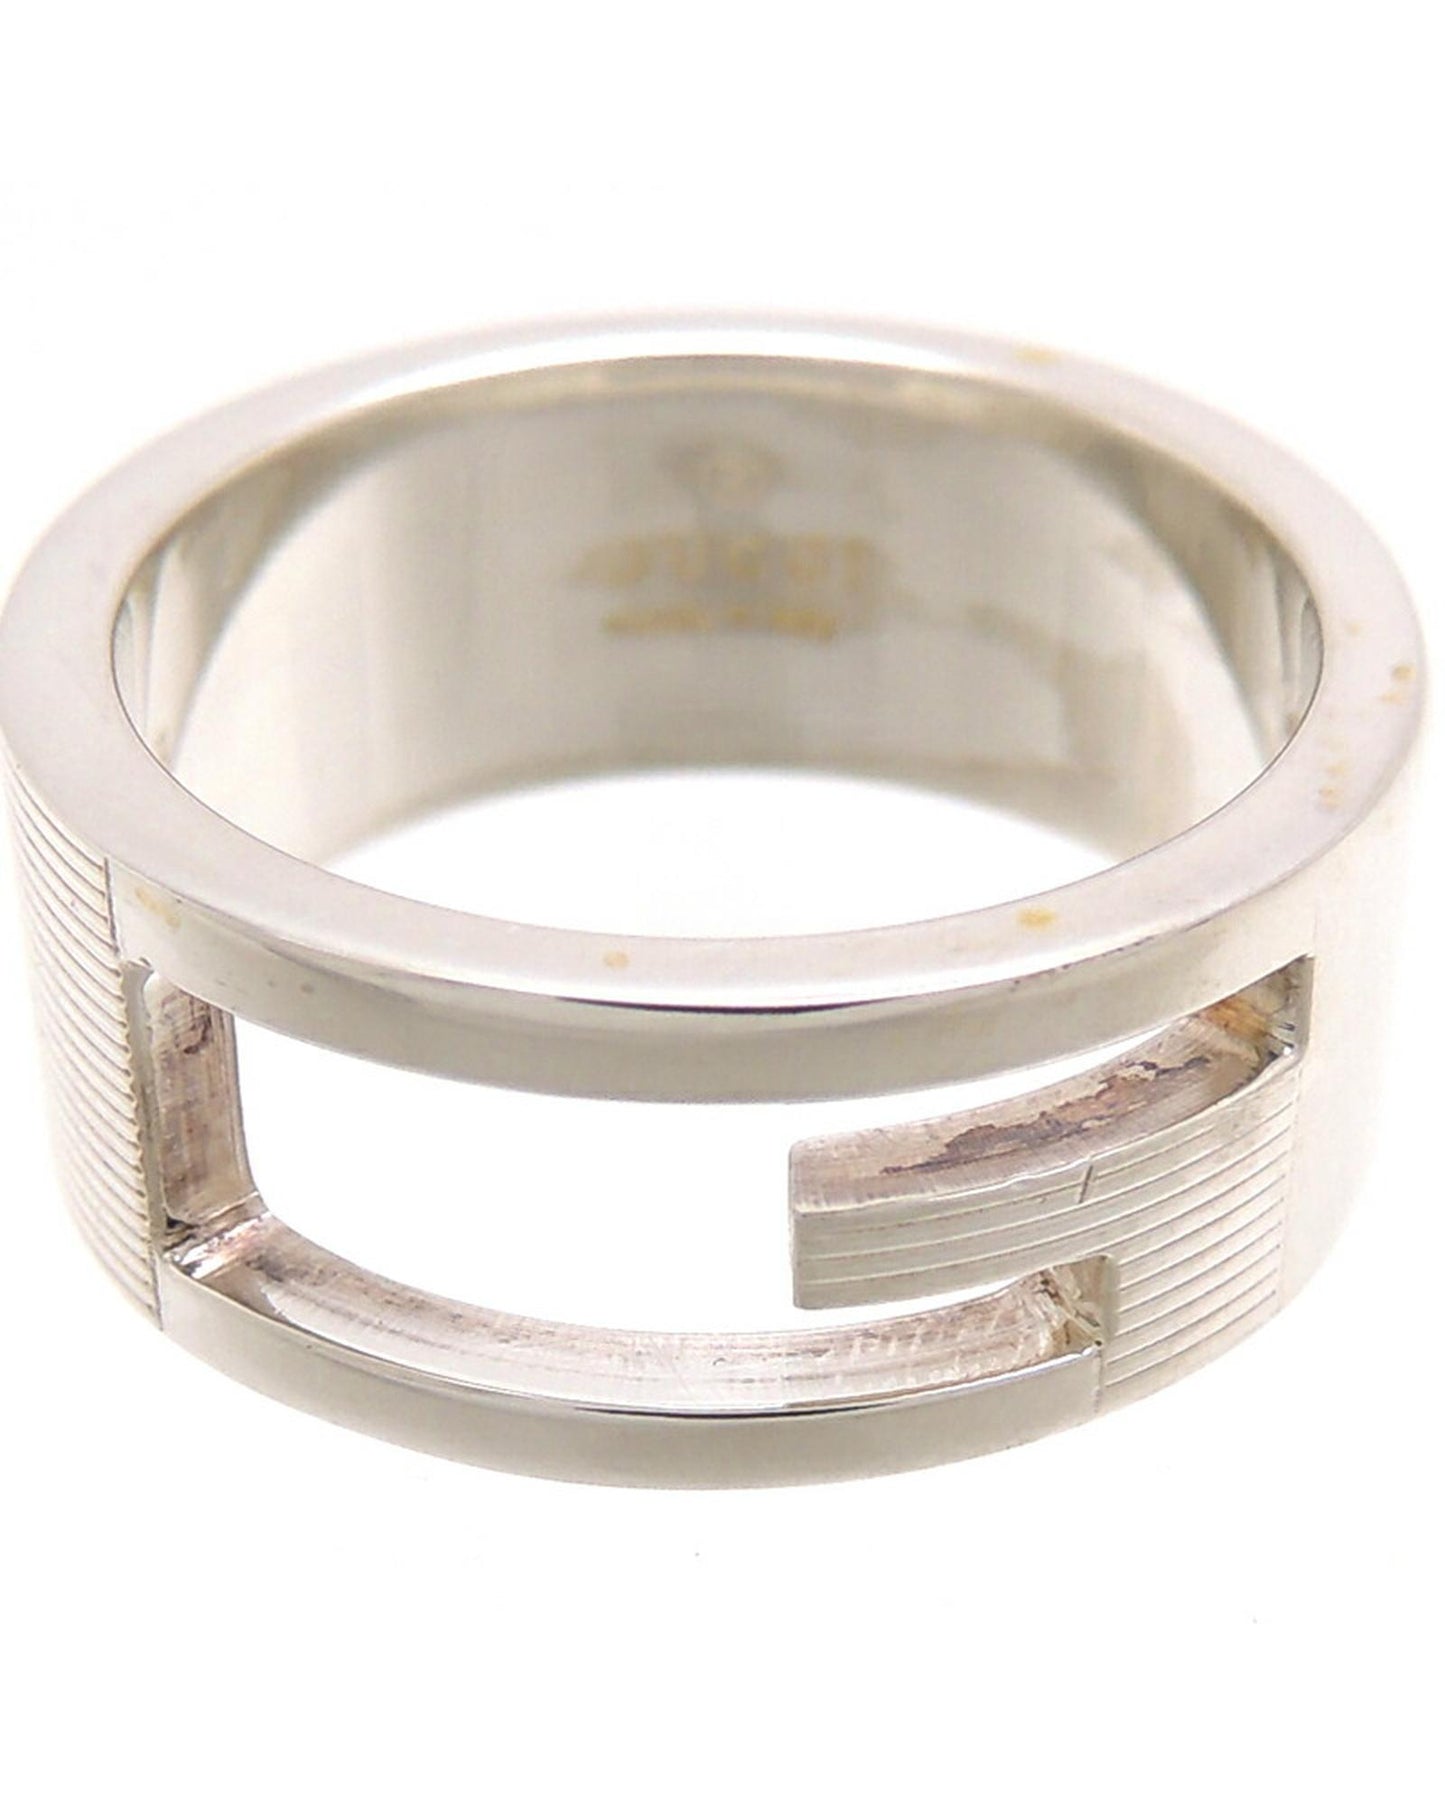 Gucci Men's Silver G Ring Jewelry - 53.1 Measurement in Silver